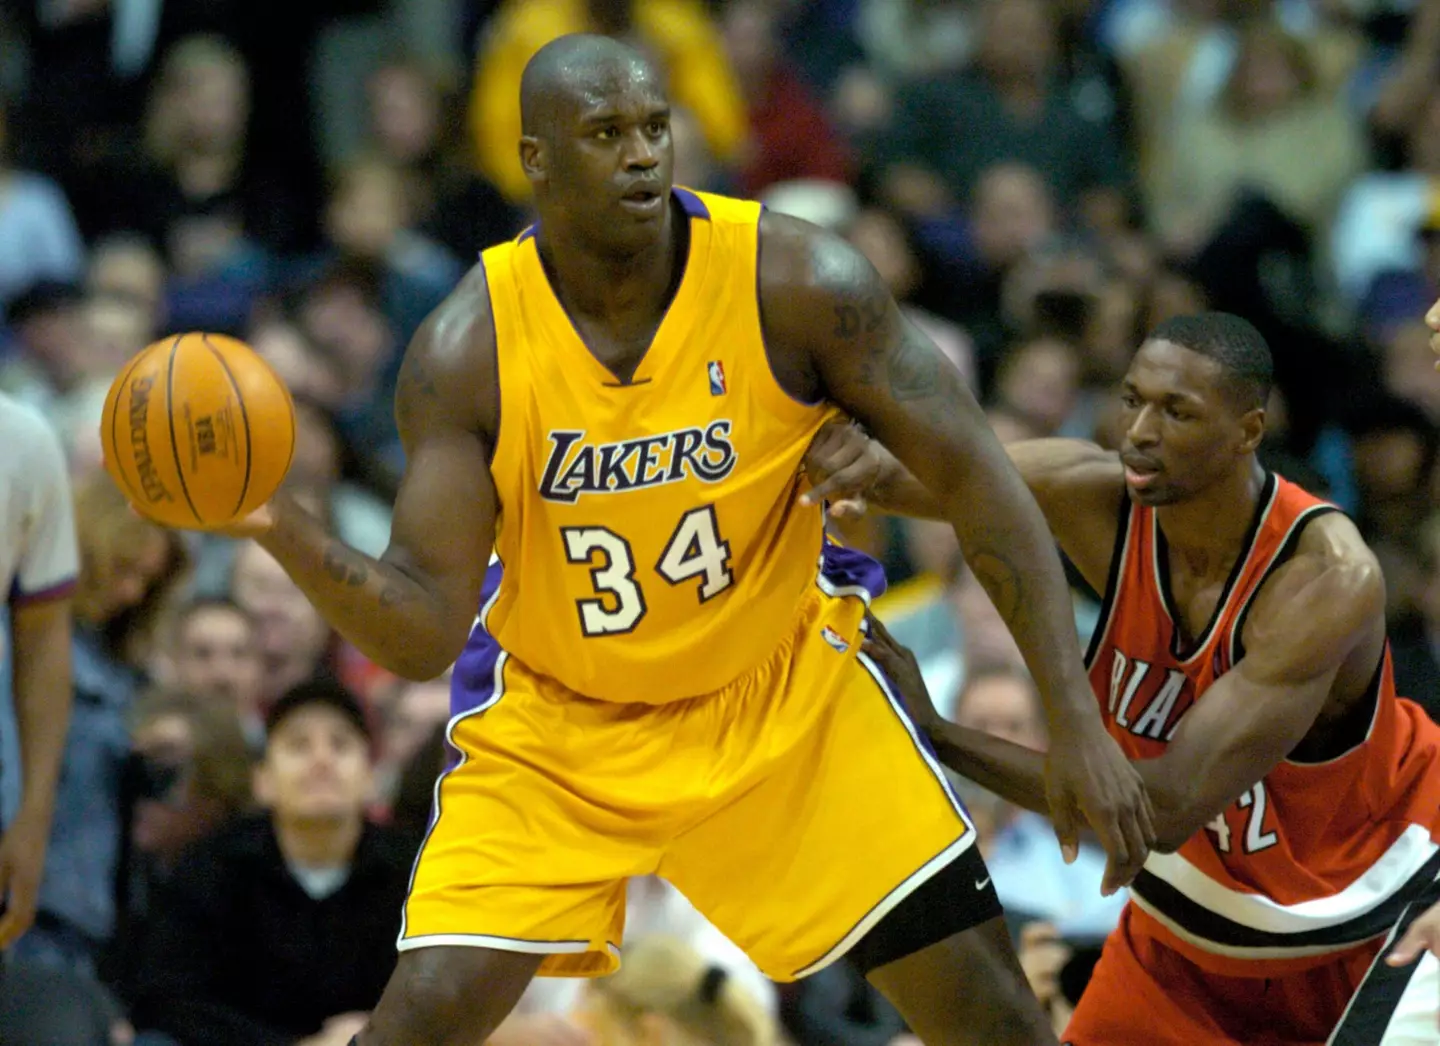 O'Neal is one of the greatest centres in NBA history. (Image